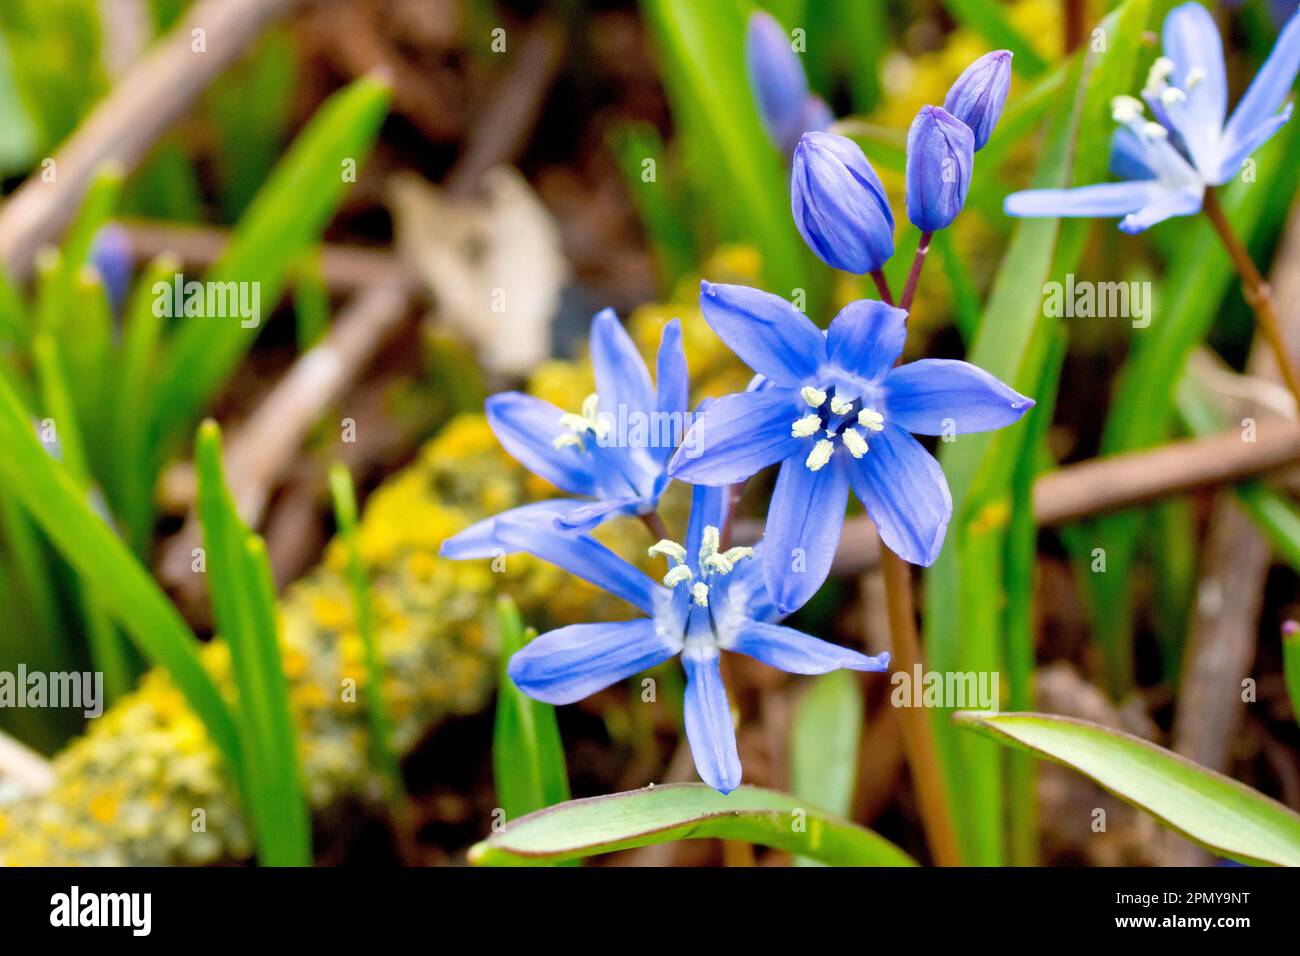 Spring Squill (scilla verna), close up of a group of the bright blue flowers commonly planted in gardens and found as escapees in the wild. Stock Photo